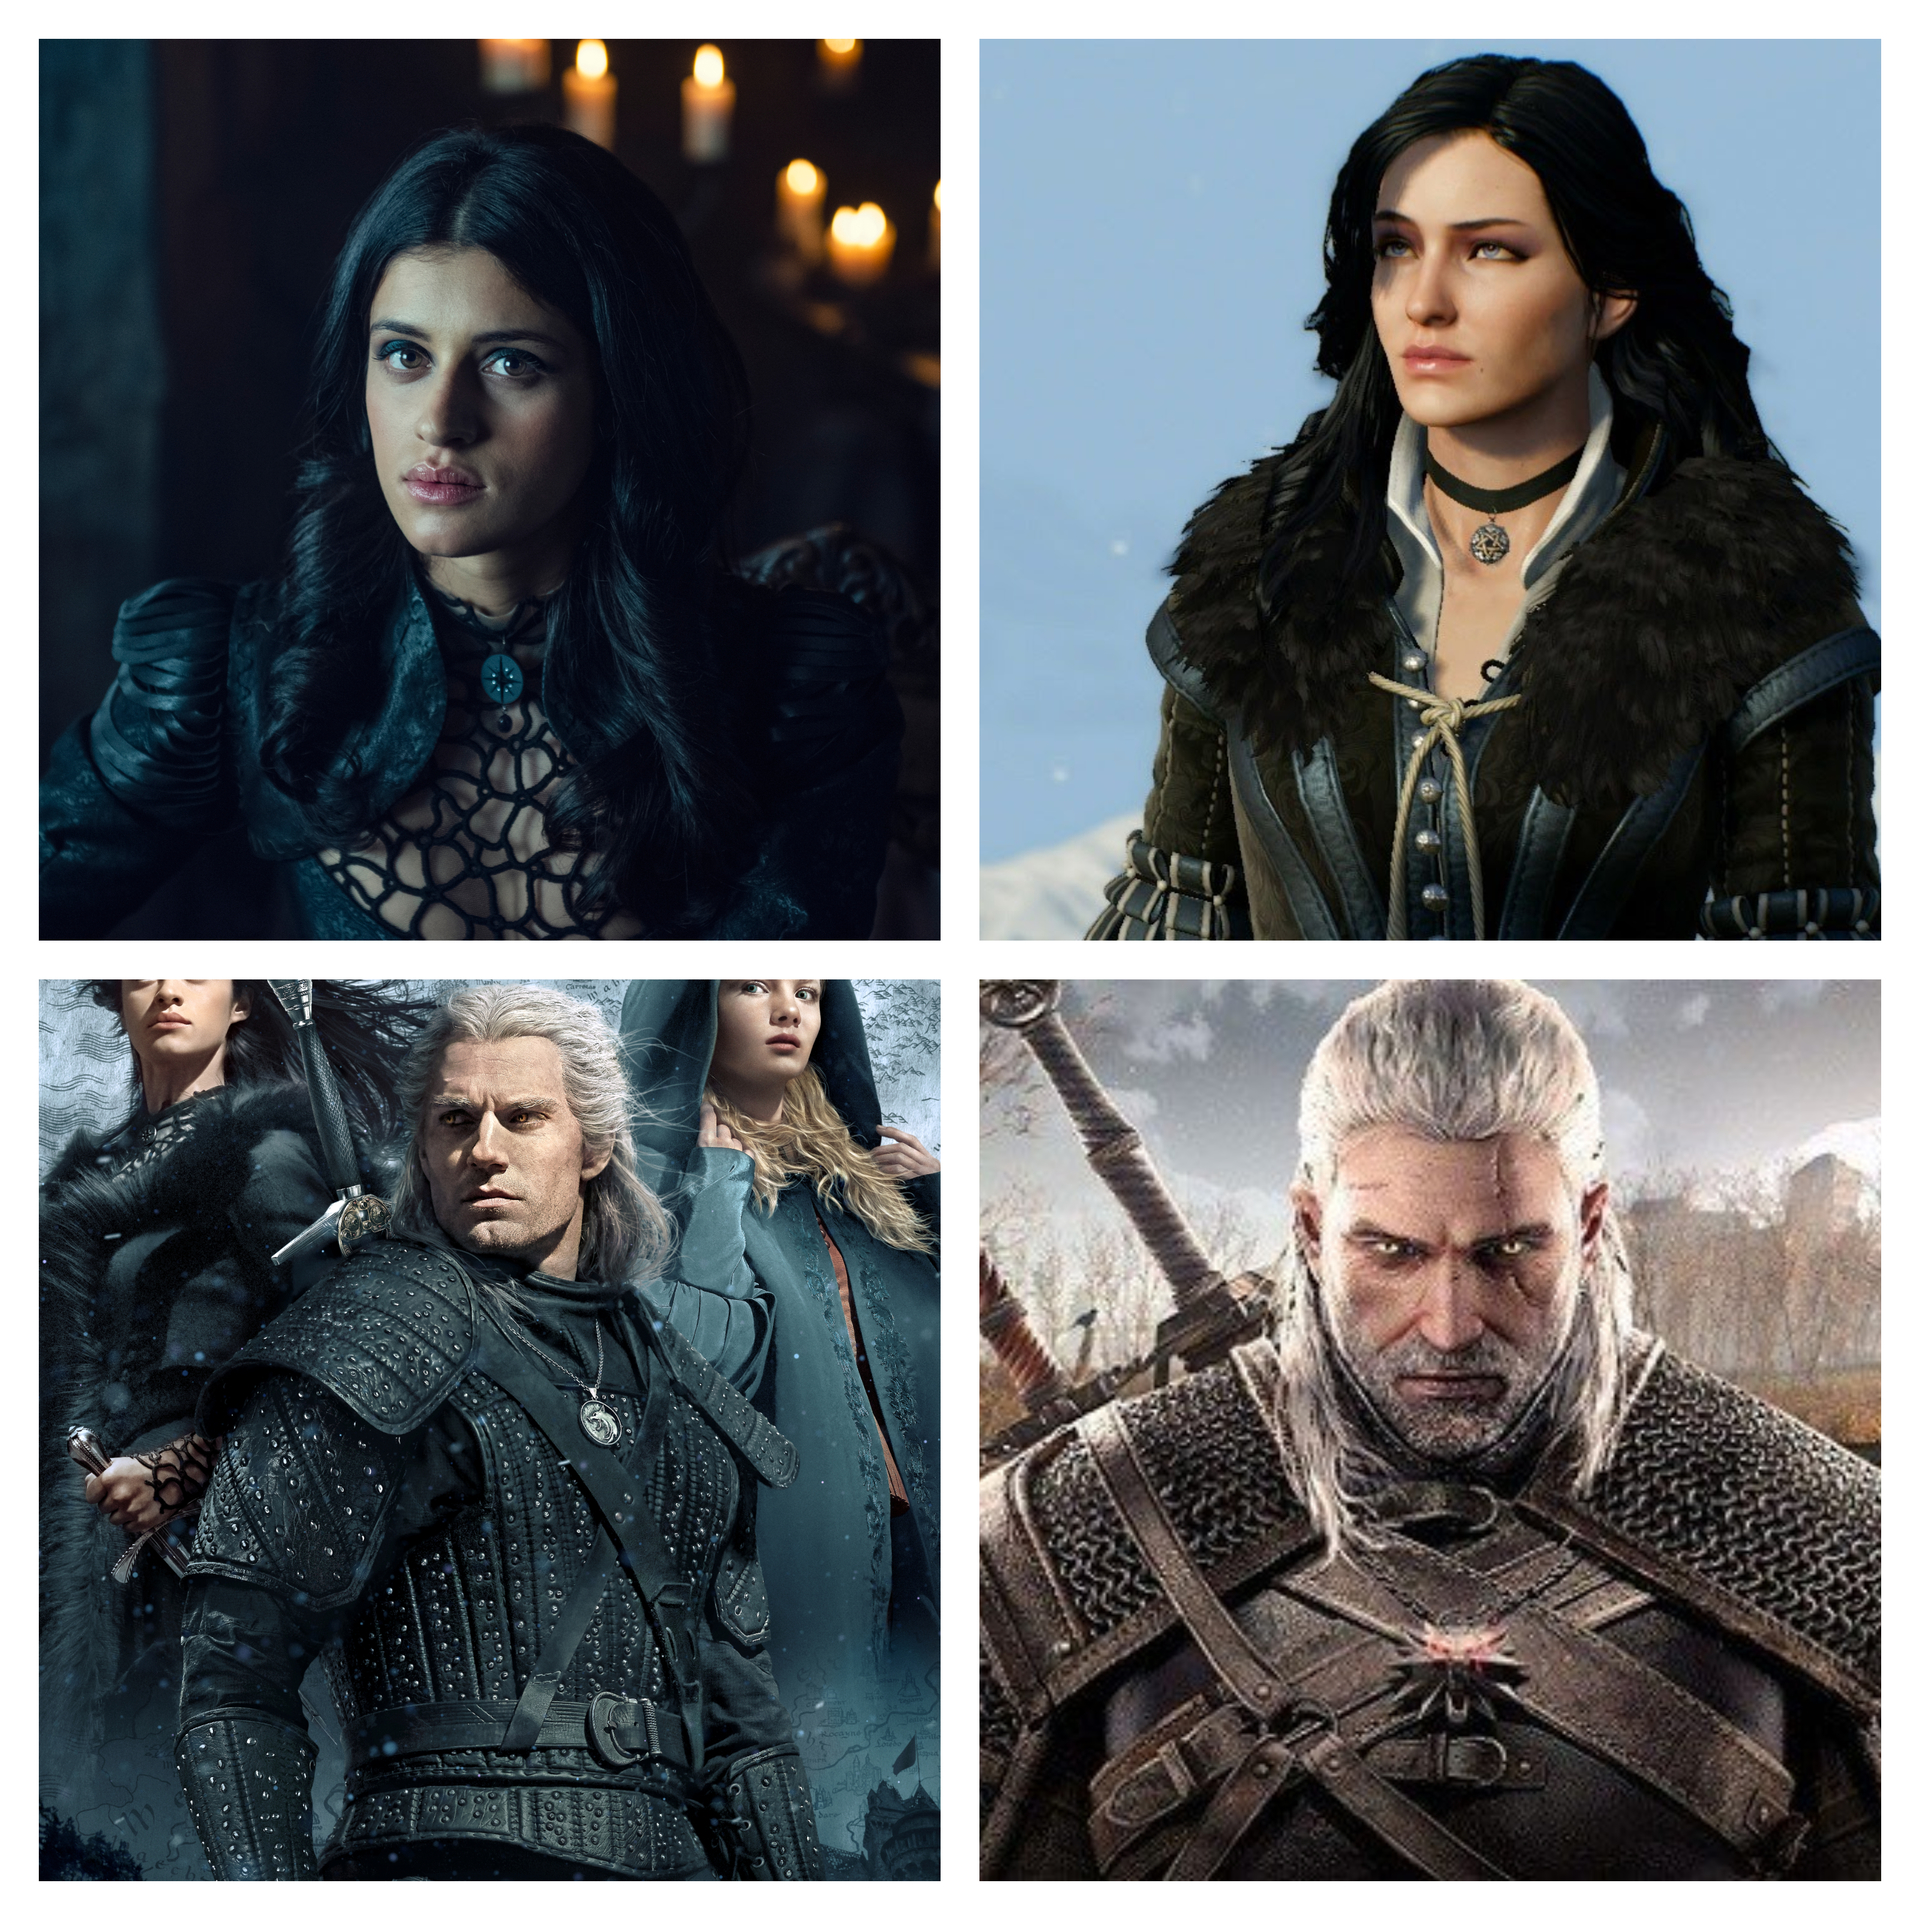 The Witcher comparison with game characters